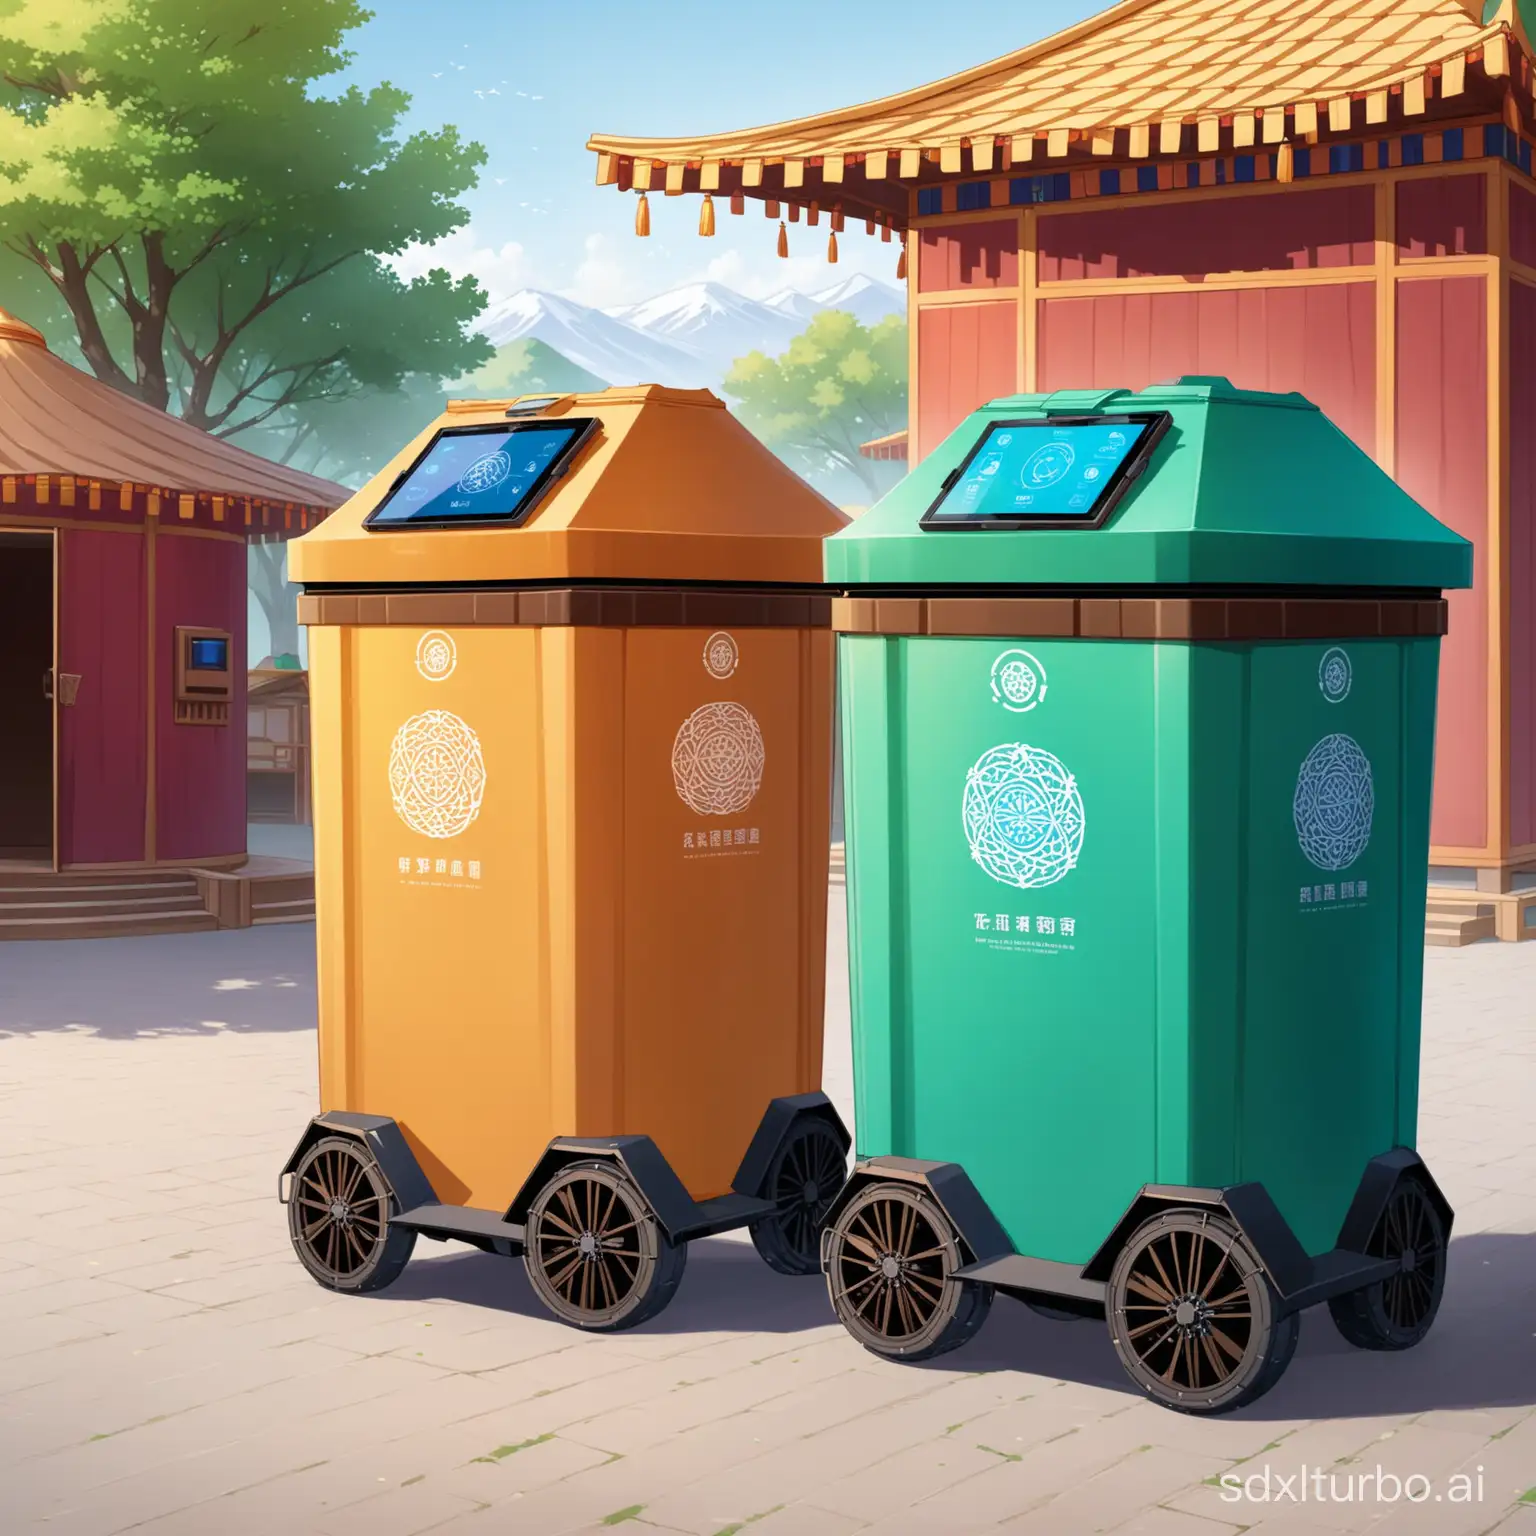 Intelligent garbage bins in the shape of Mongolian yurts, with wheels to move on their own, and they even have their own screens and eyes, resembling Mongolian yurts, and they are also garbage bins.